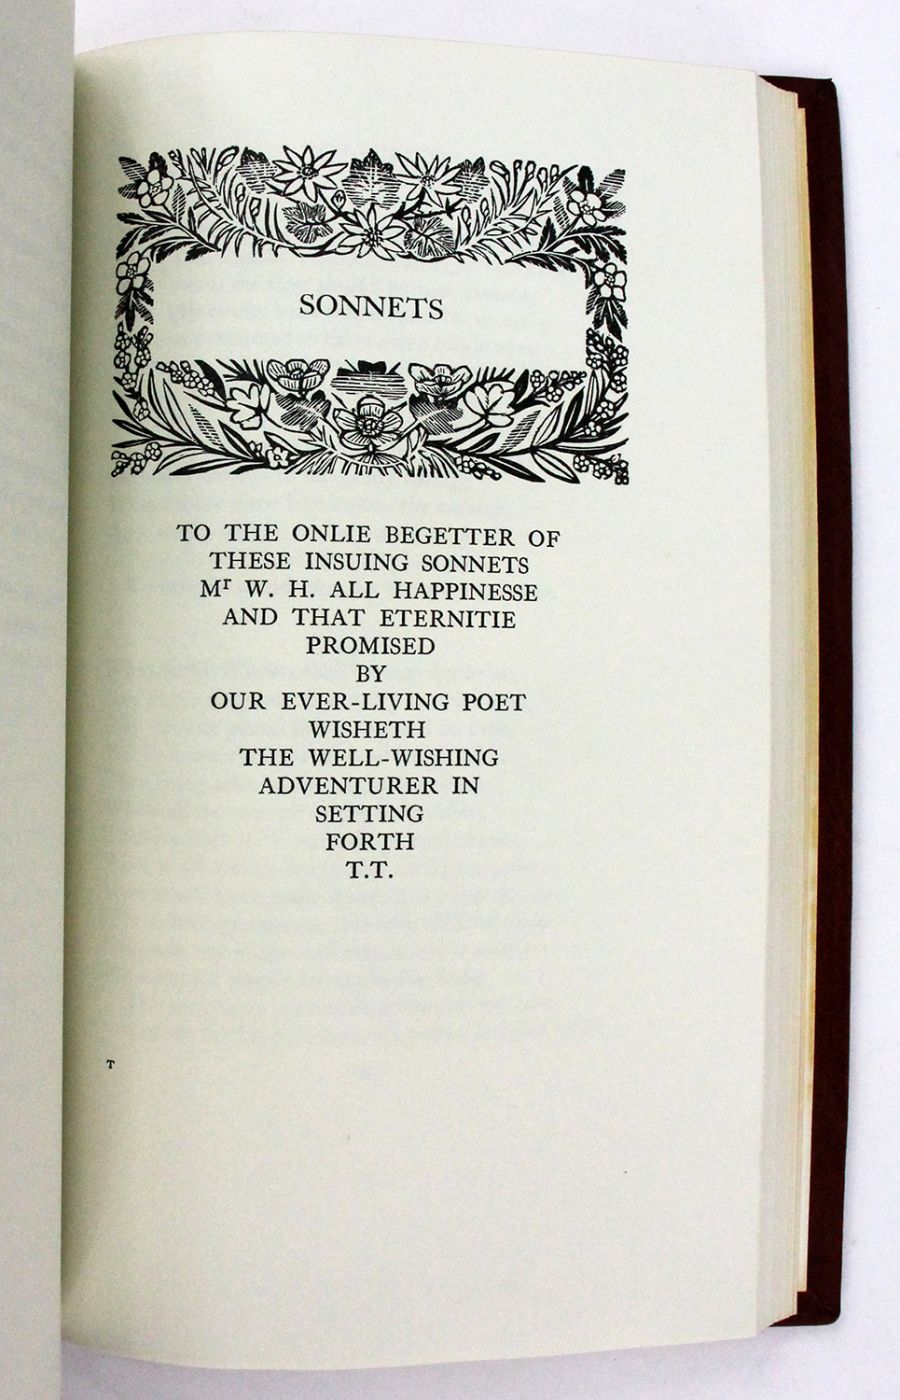 THE POEMS & SONNETS OF WILLIAM SHAKESPEARE -  image 5